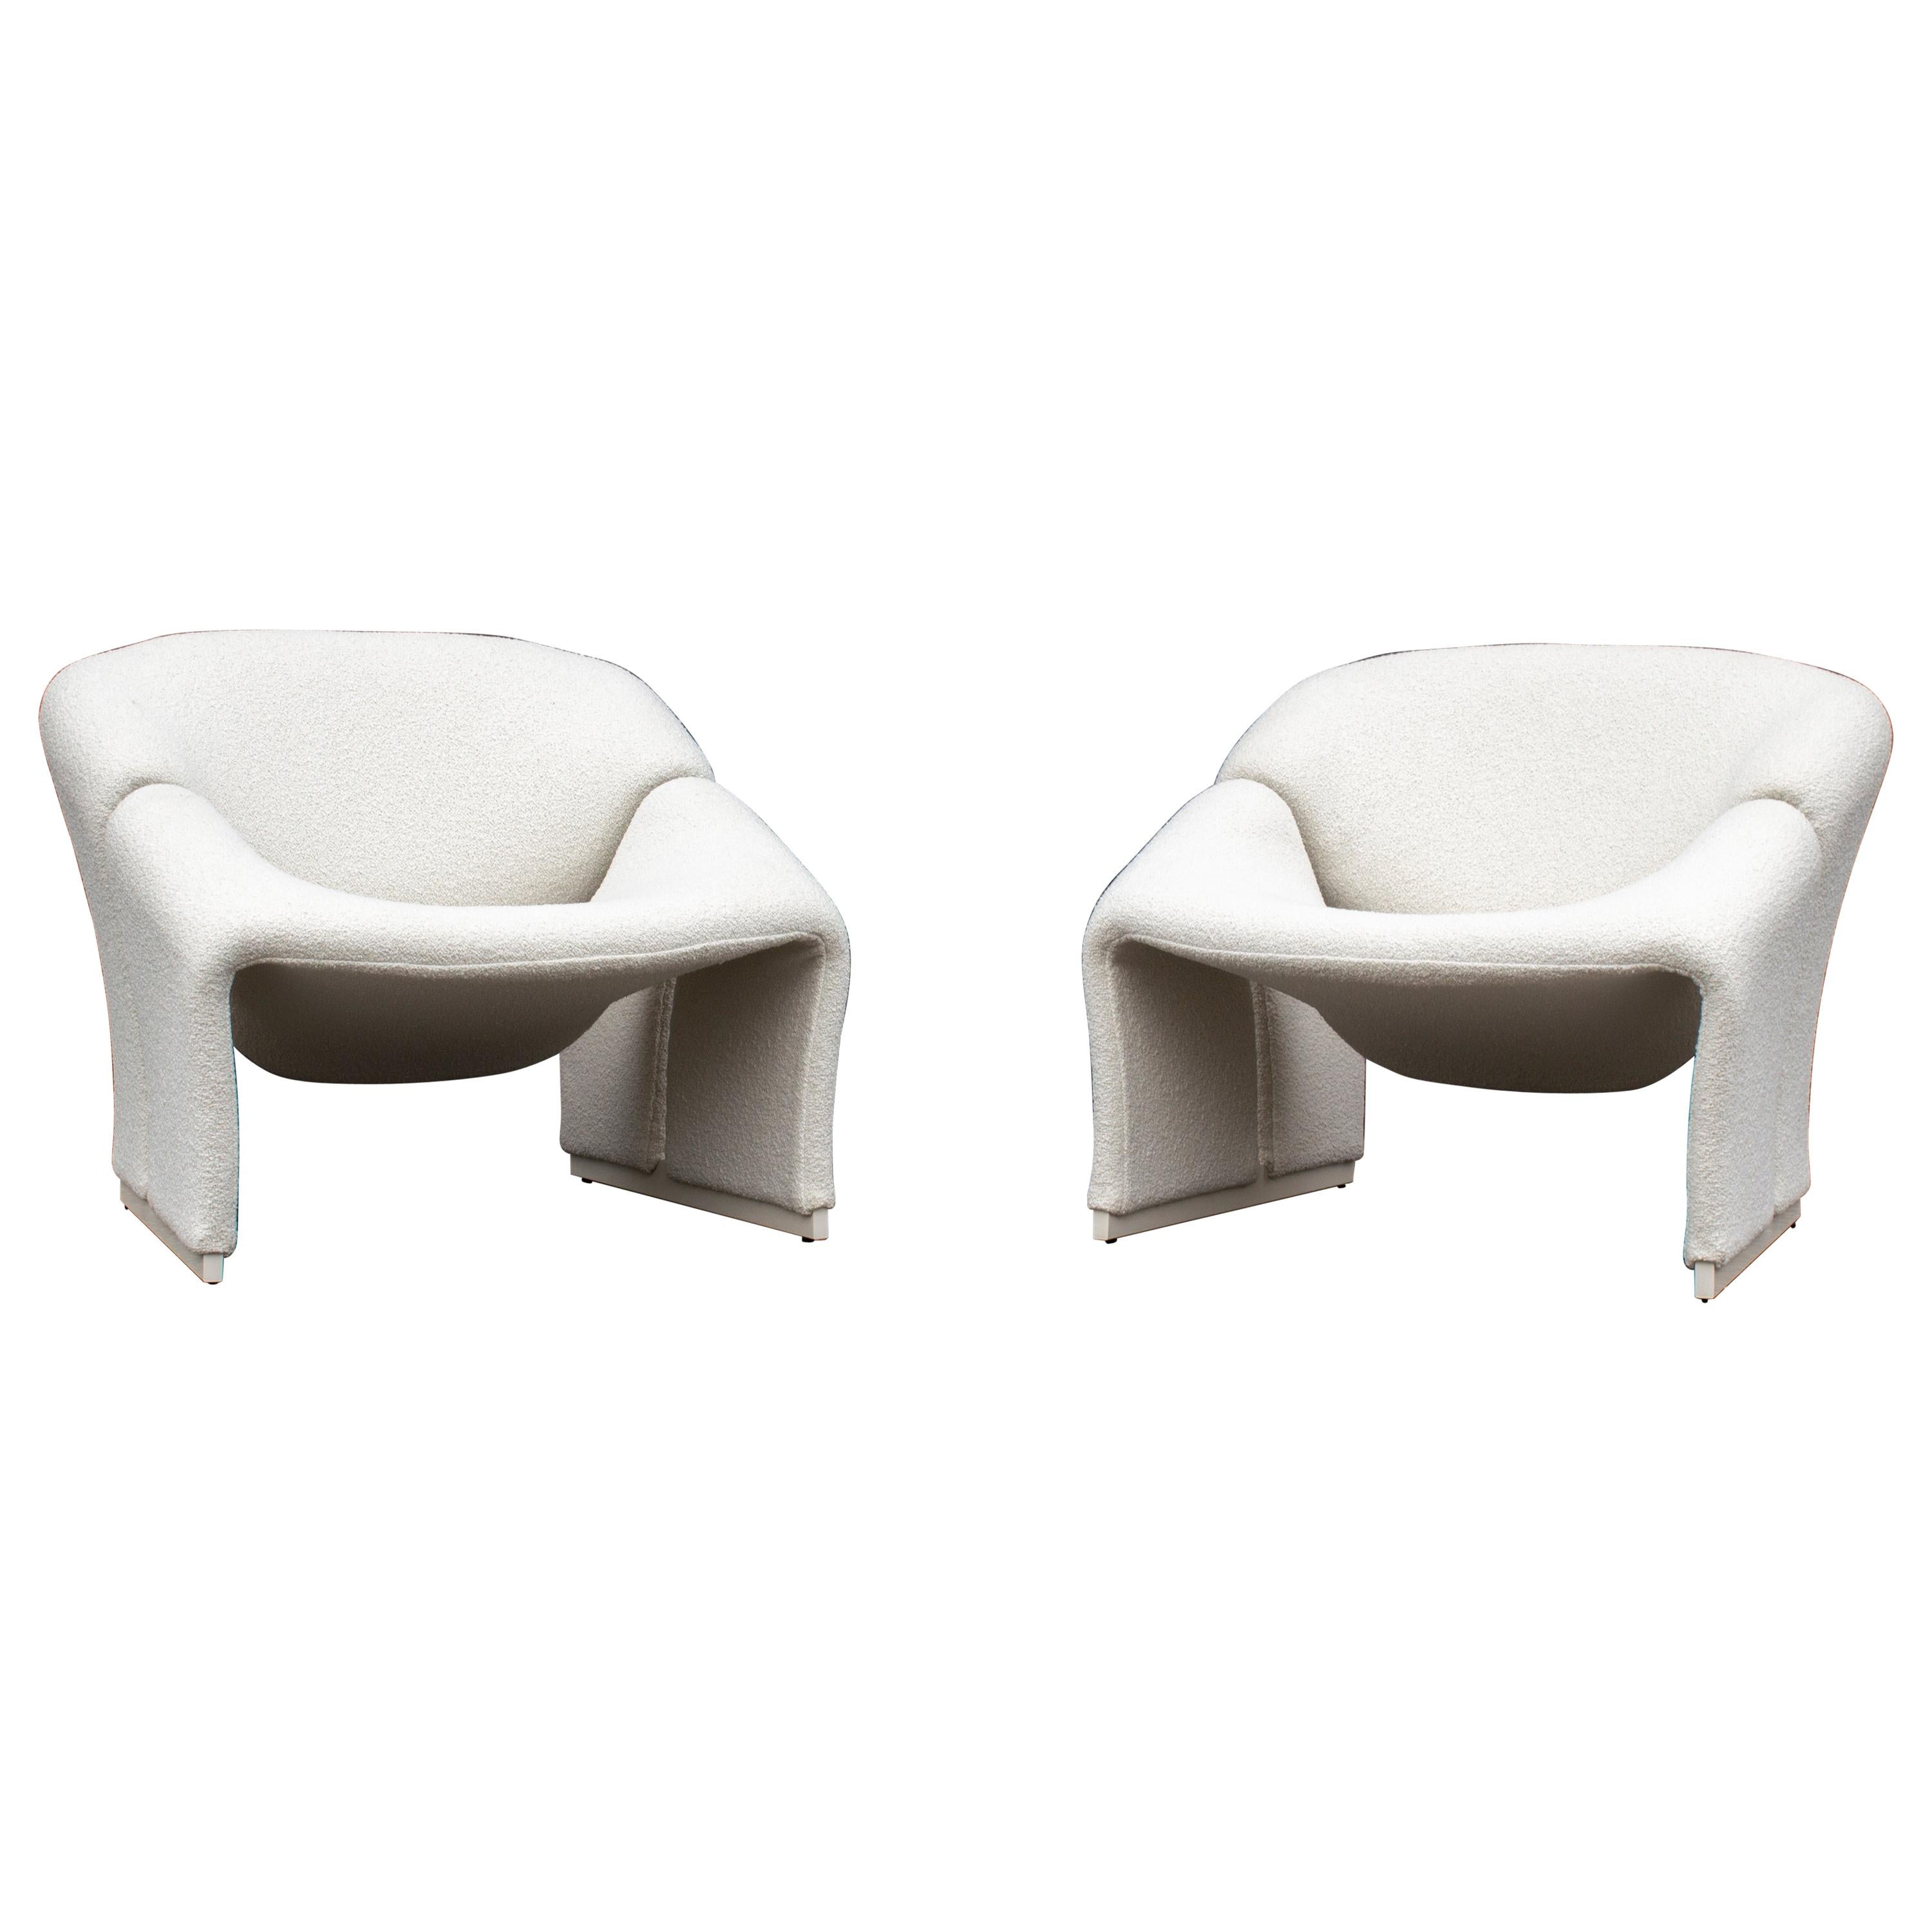 Early Pair of French Model F580 Lounge Chairs by Pierre Paulin for Artifort